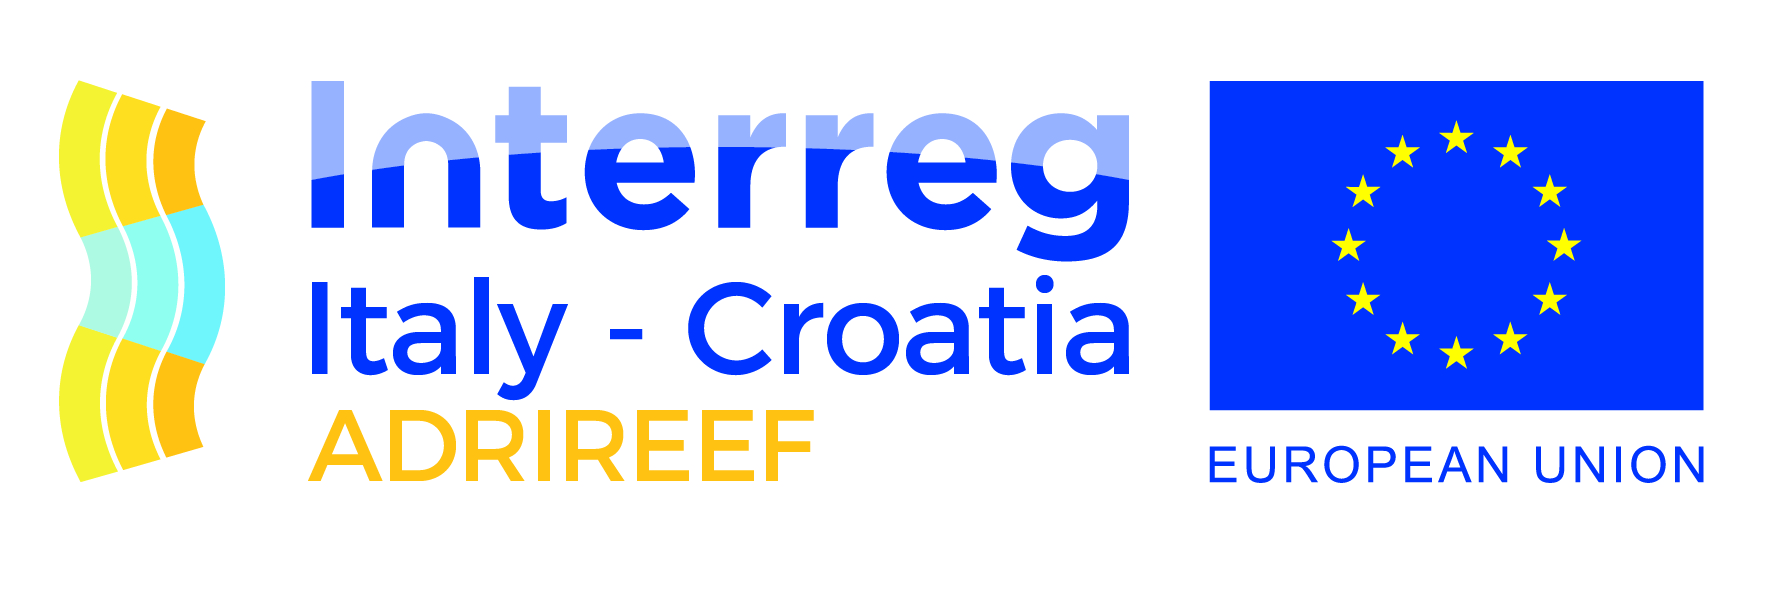 ADRIREEF – Innovative exploitation of Adriatic Reefs in order to strengthen blue economy